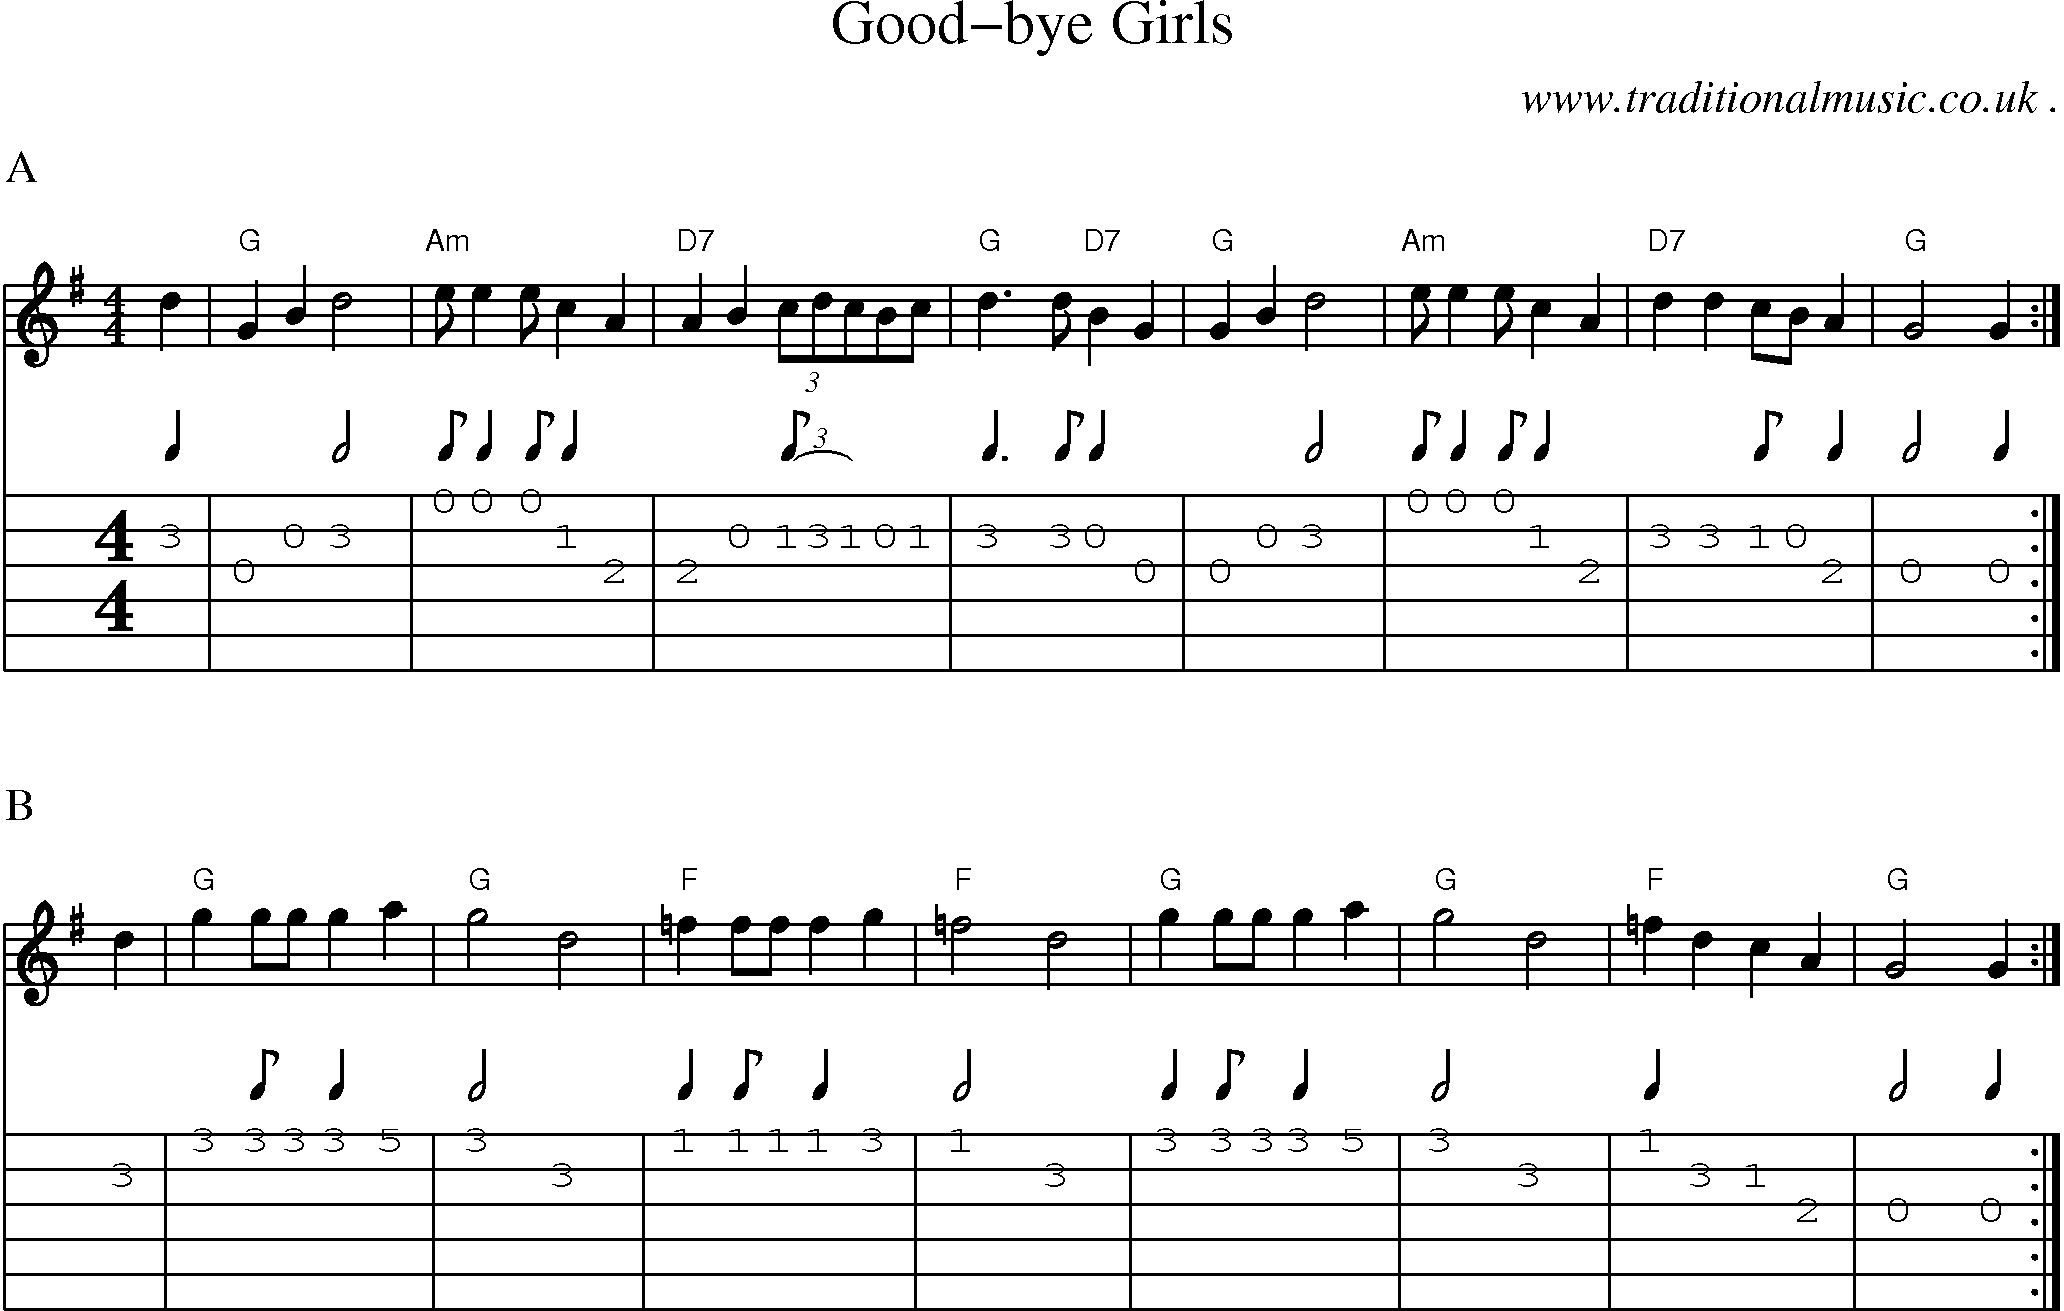 Music Score and Guitar Tabs for Good-bye Girls